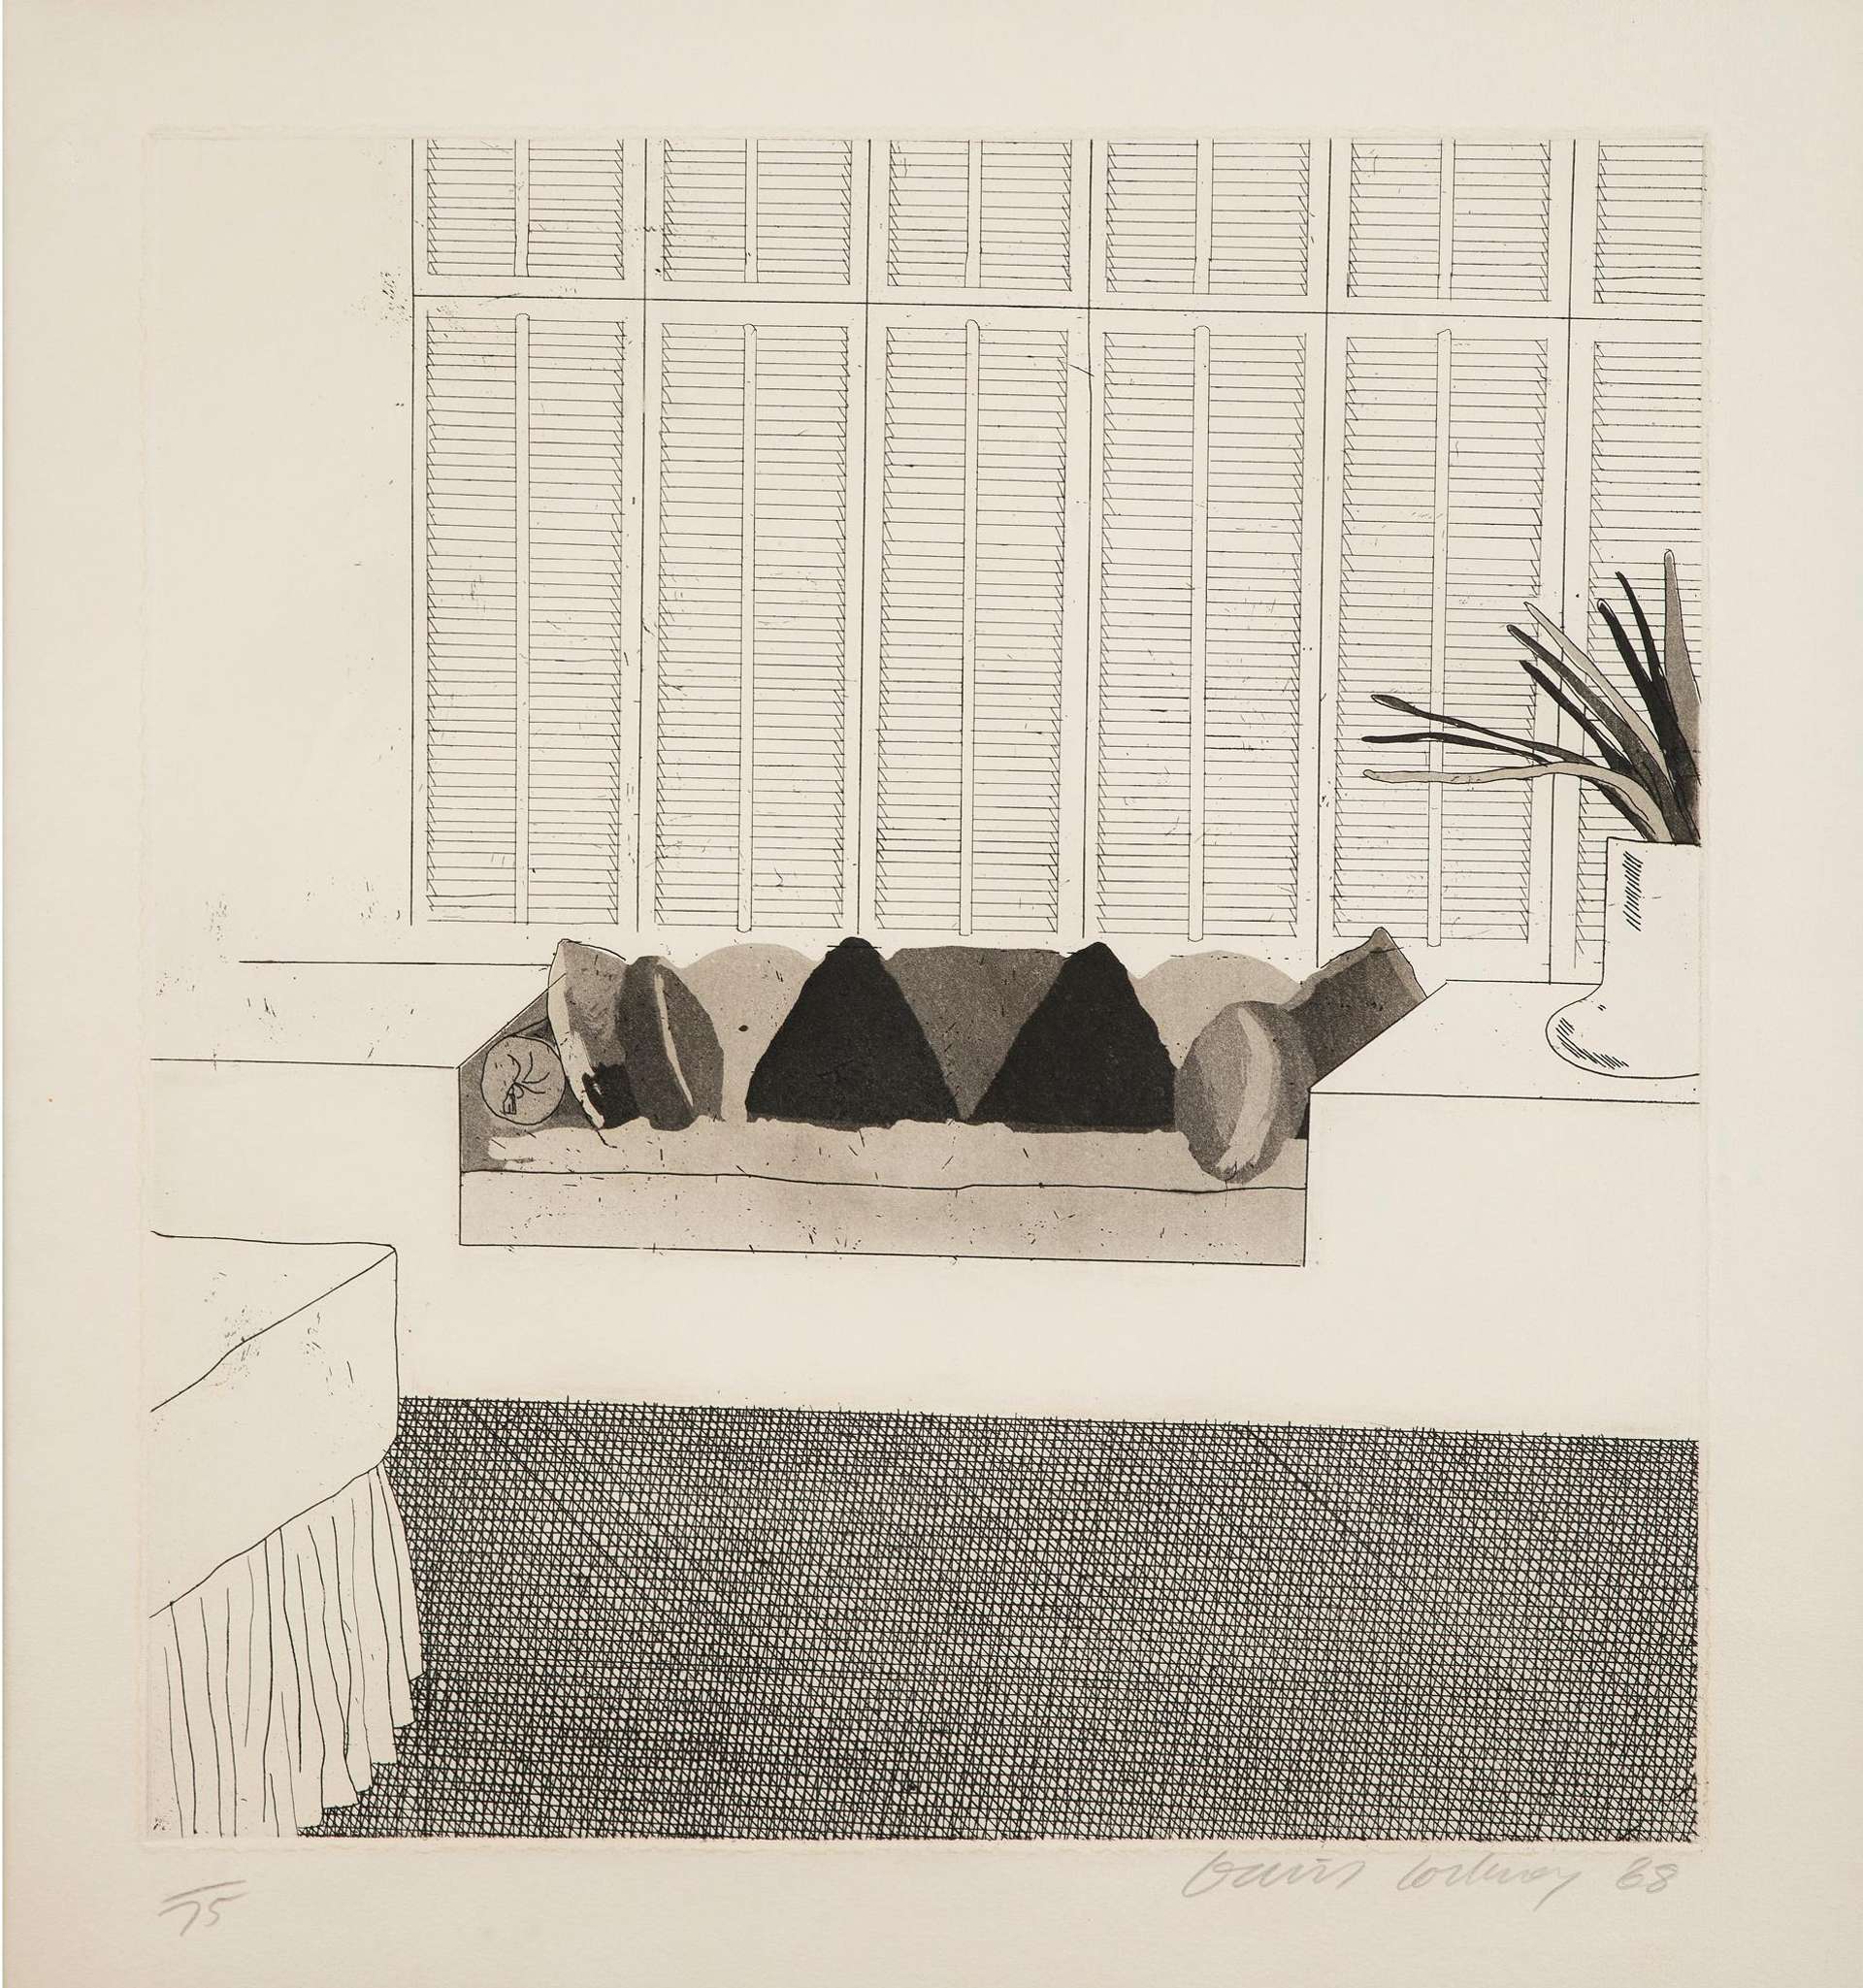 David Hockney’s Cushions. A black and white etching of an interior setting of a cushioned nook area in front of closed shutters and a house plant.